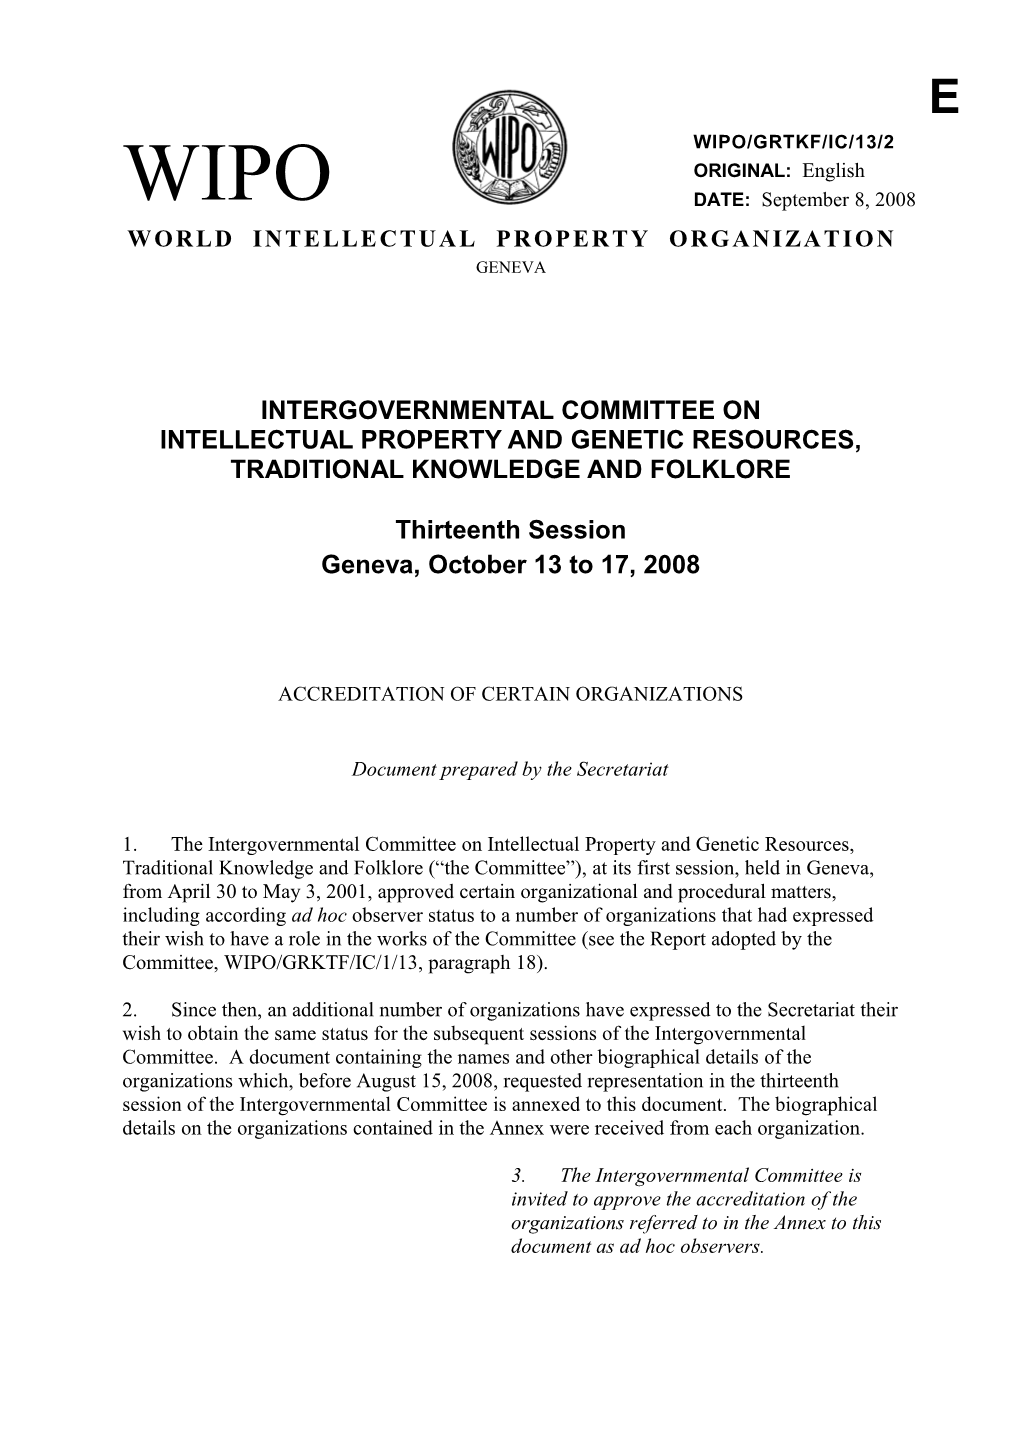 Intergovernmental Committee on Intellectual Property and Genetic Resources, Traditional s9